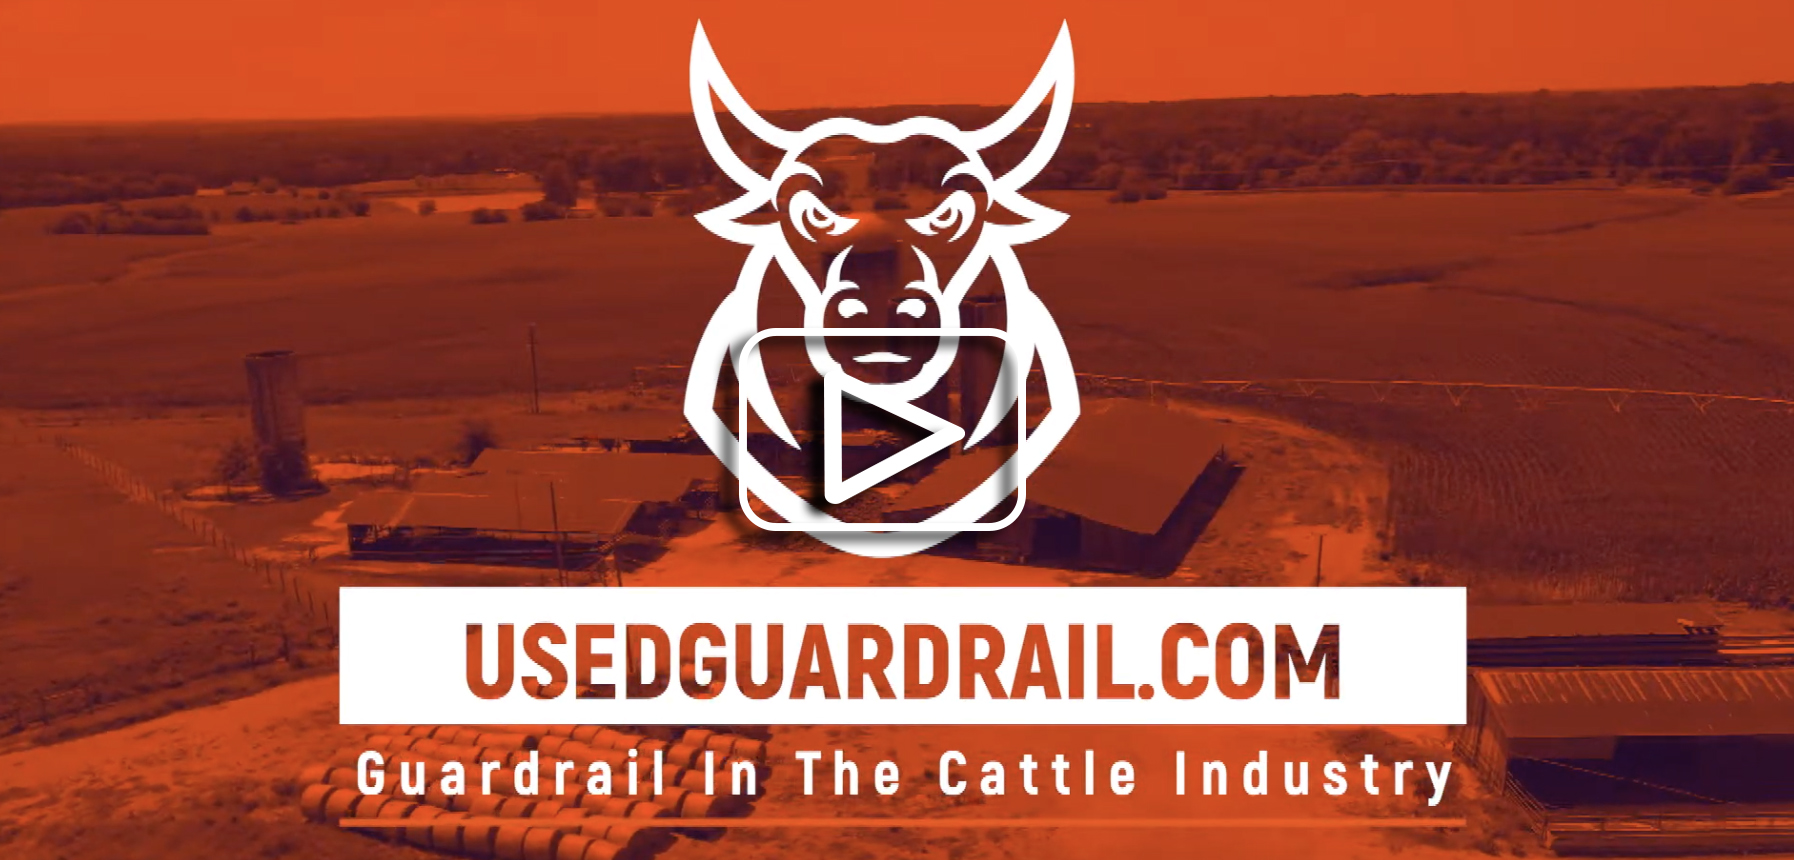 Guardrail In The Cattle Industry